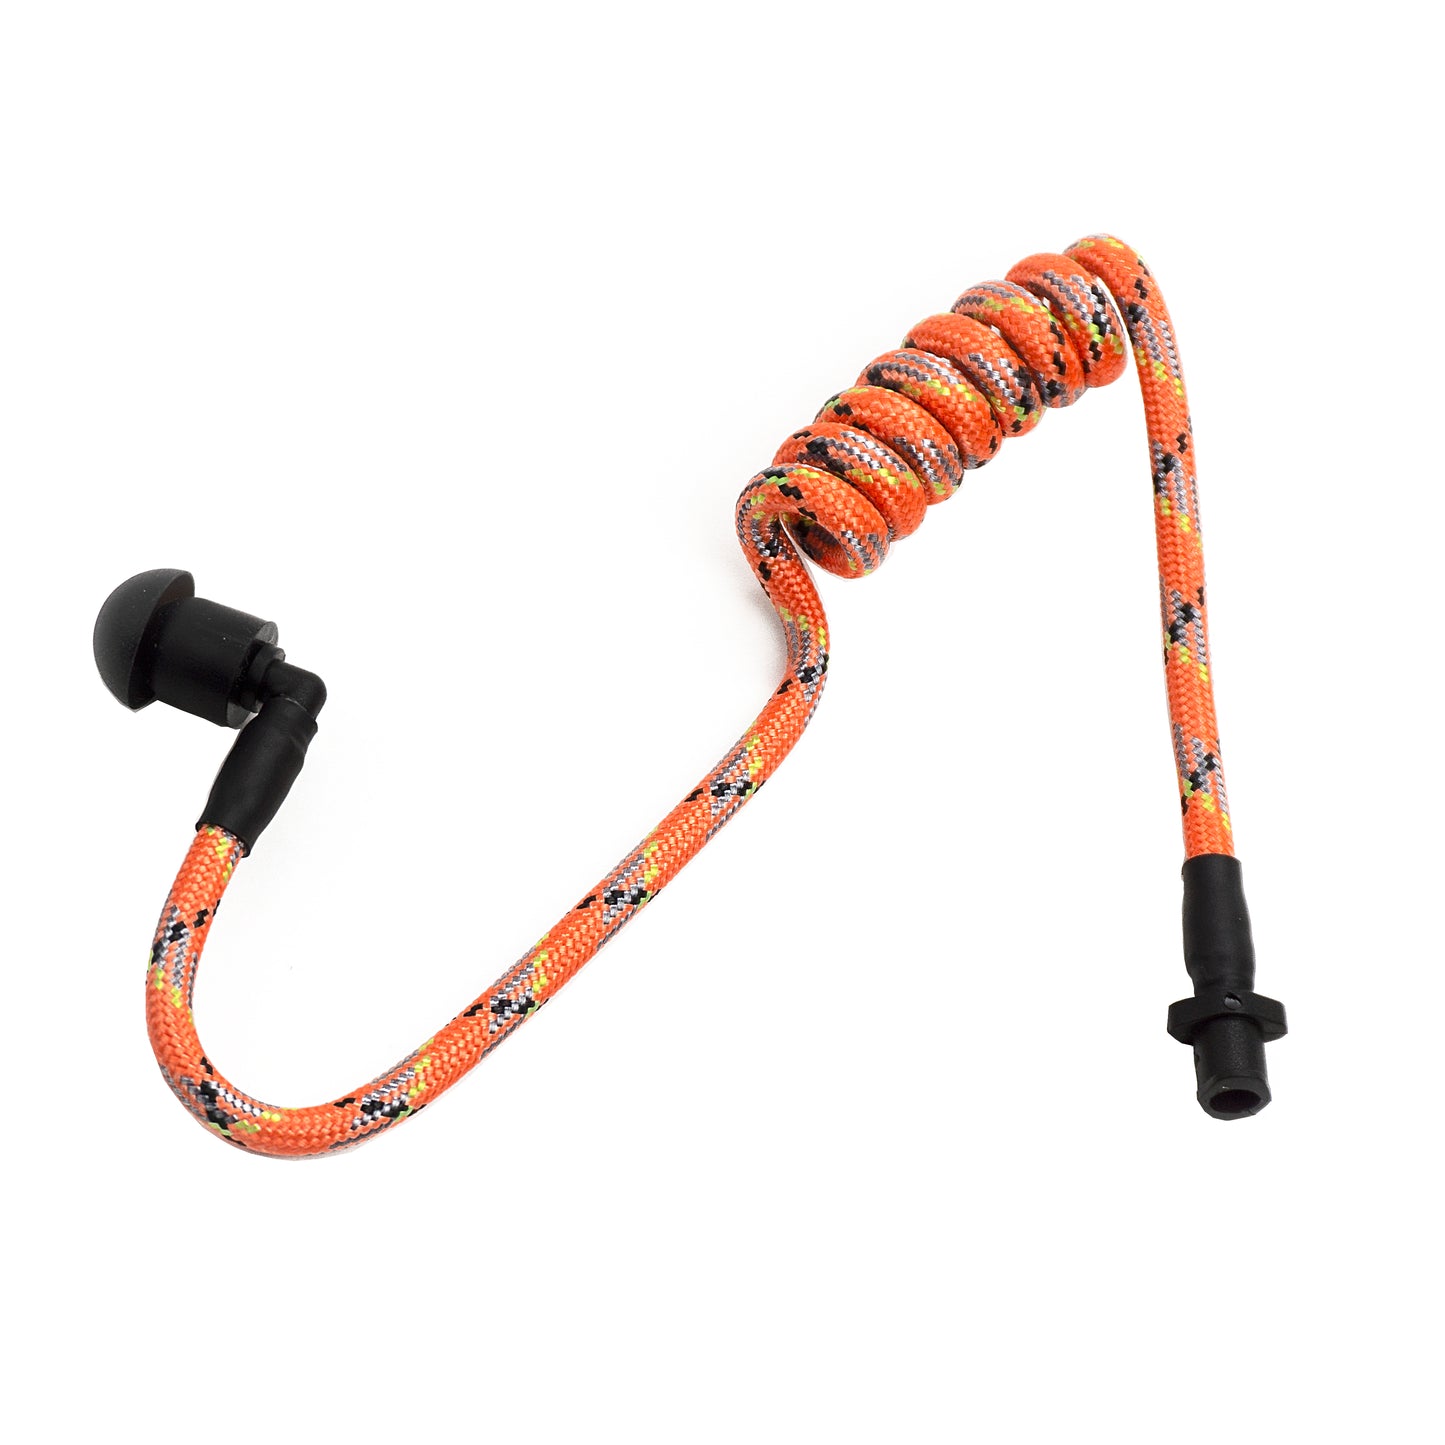 "Tubeez" Earpiece for Walkie Headsets - Many Colors!